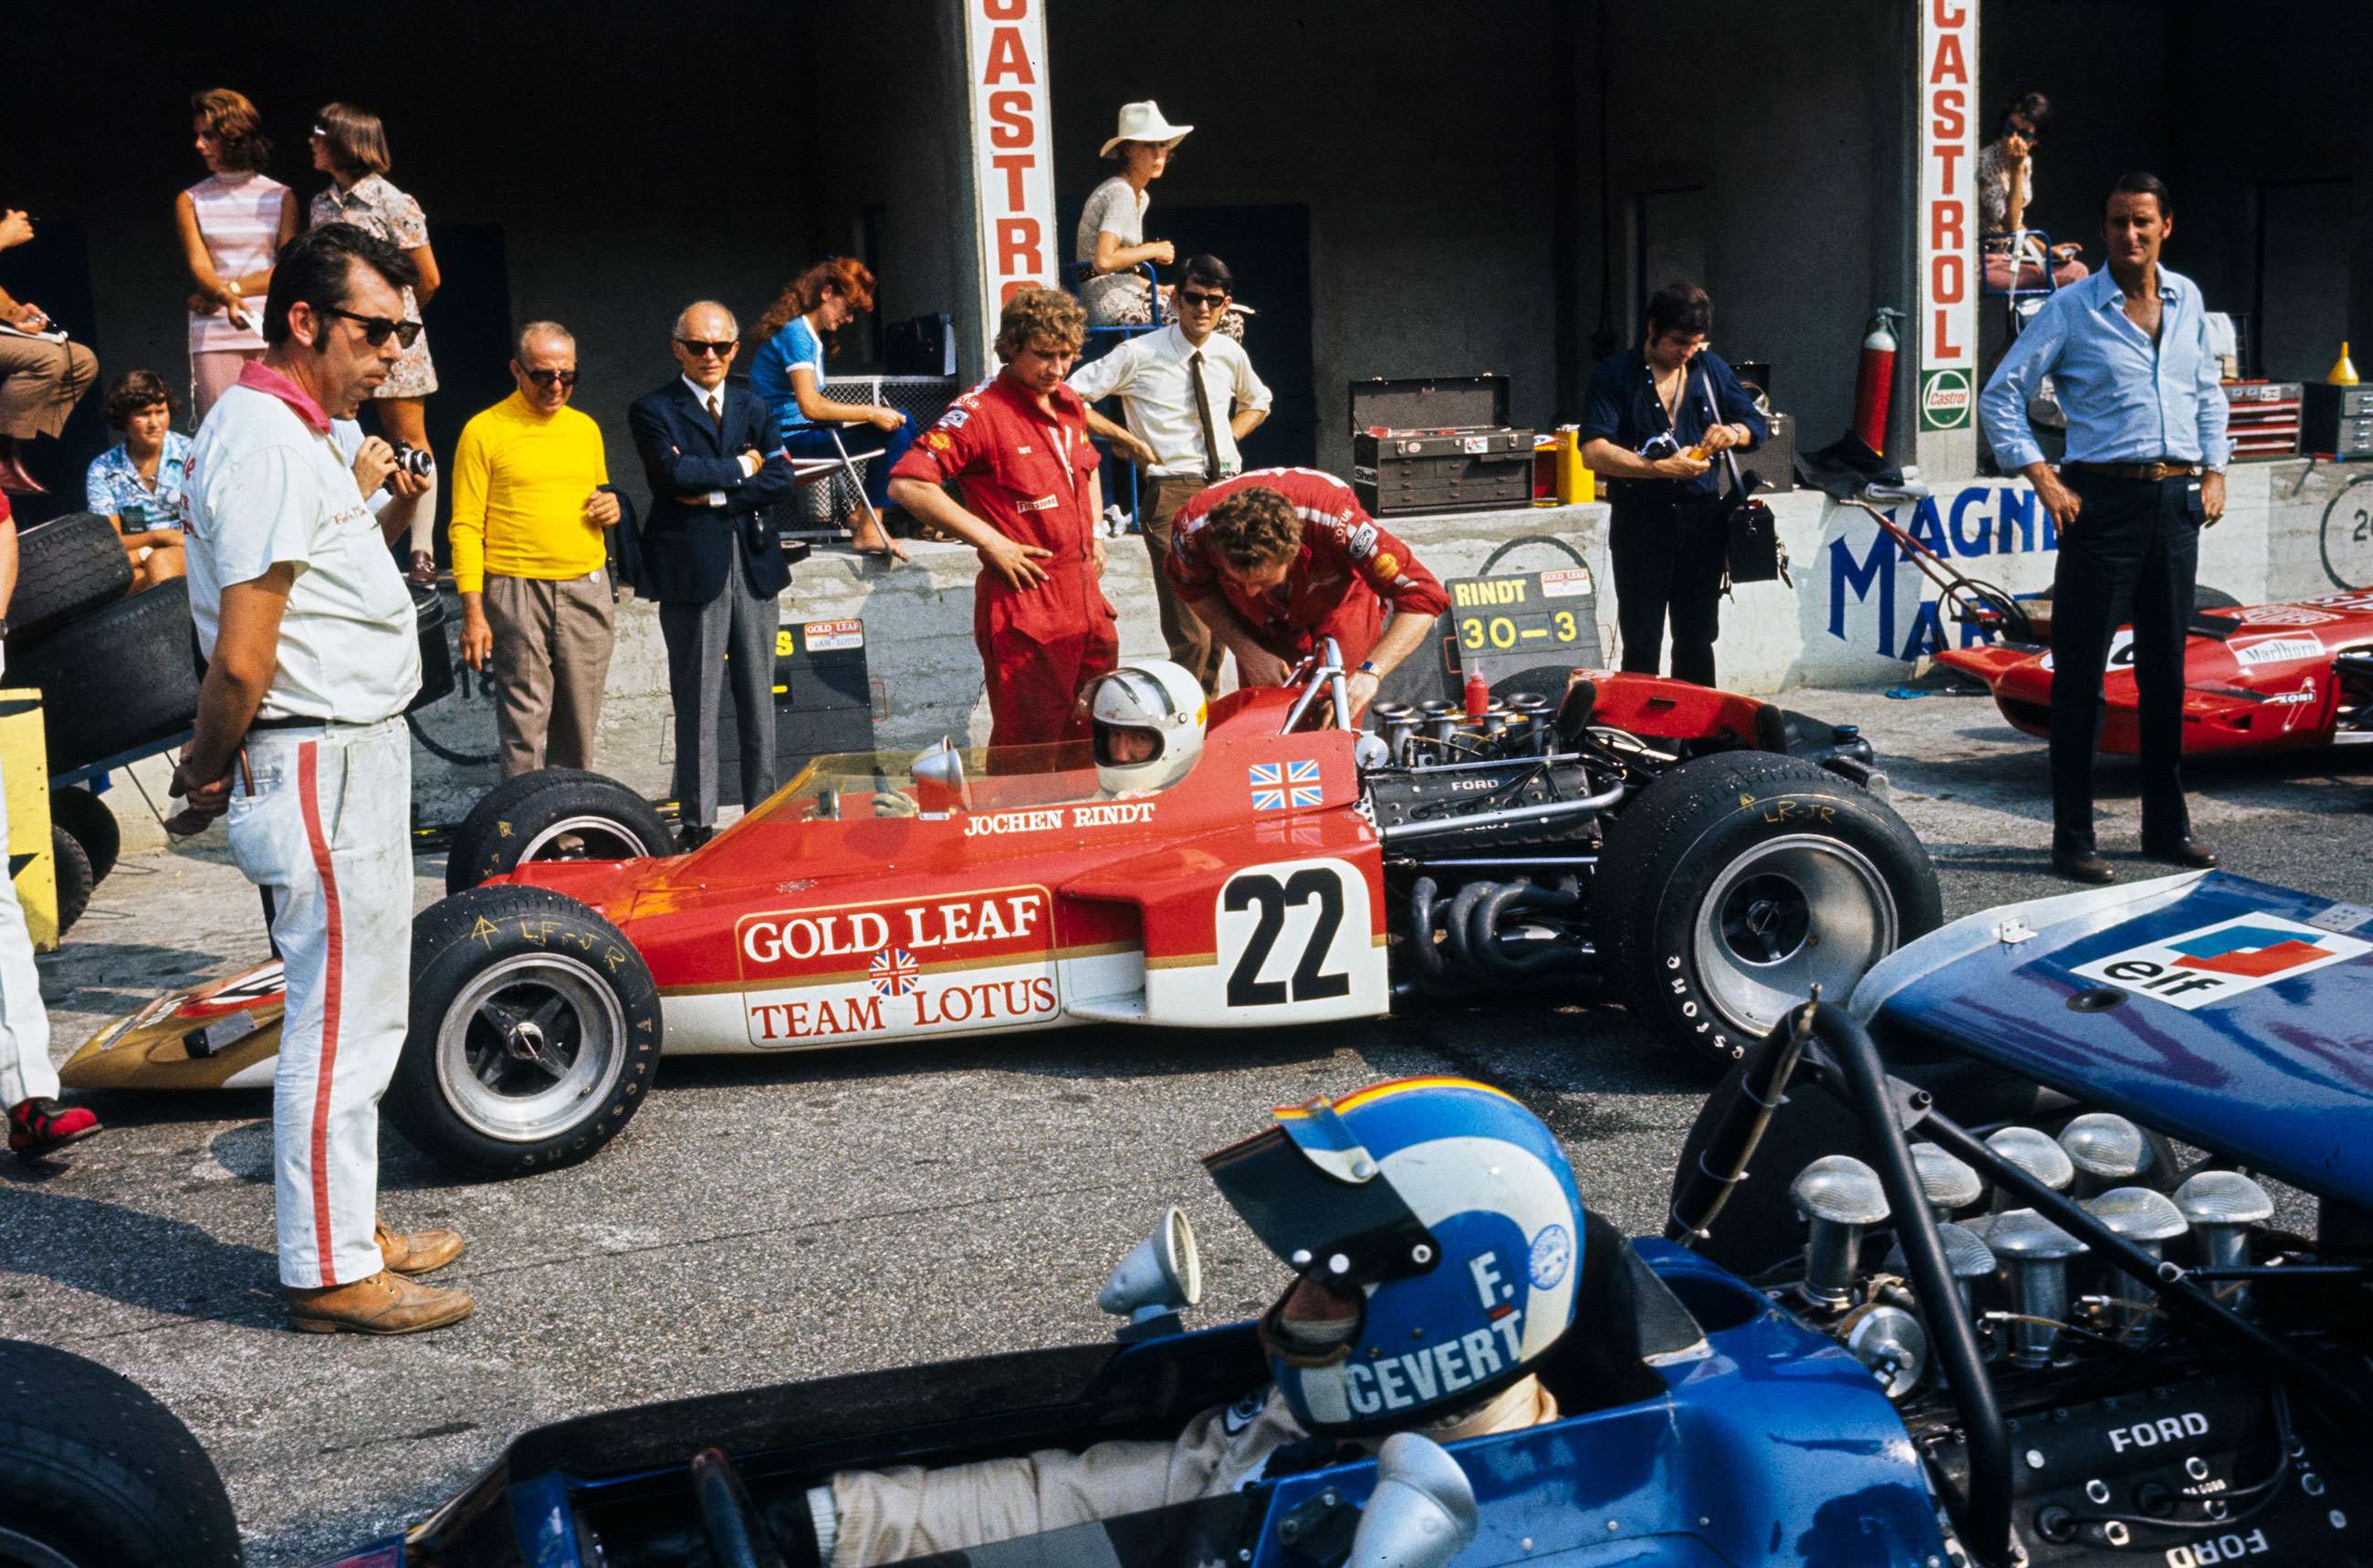 Jochen before practice for the 1970 Italian Grand Prix at Monza in his Lotus 72C, looking across to François Cevert in his March 701. 